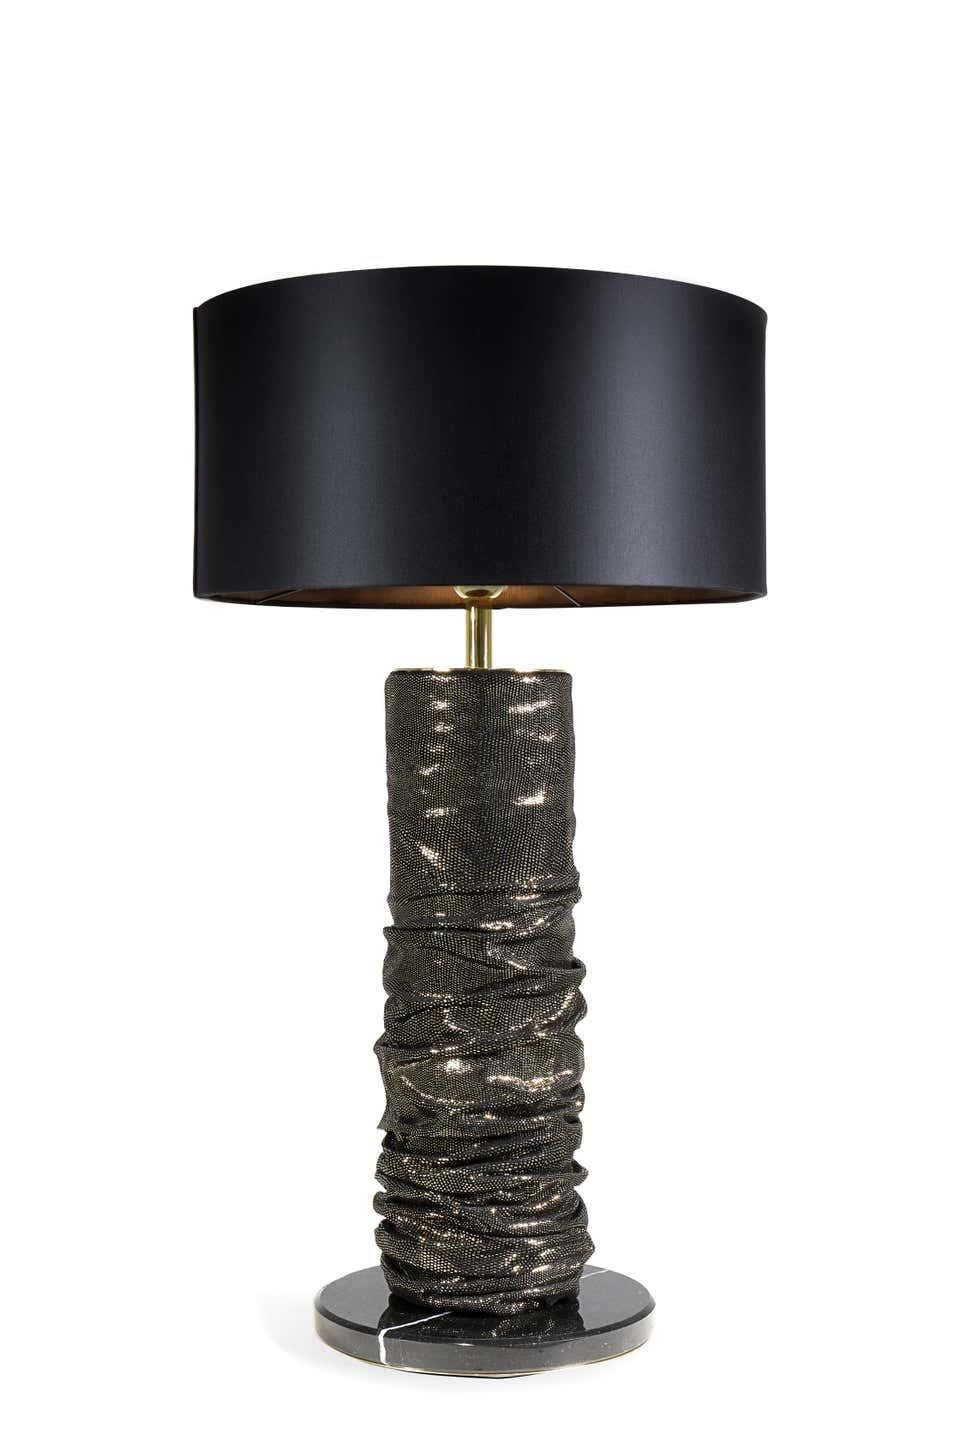 Table lamp
Base: Polished Nero Marquina marble
Body: Pixel Gold leather
Lamp shade: Opulent satin black 
Details: Polished brass in high gloss finish 
Measures: Height 37.41 in. (95 cm)
Width 17.72 in. (45 cm)
Depth 17.72 in. (45